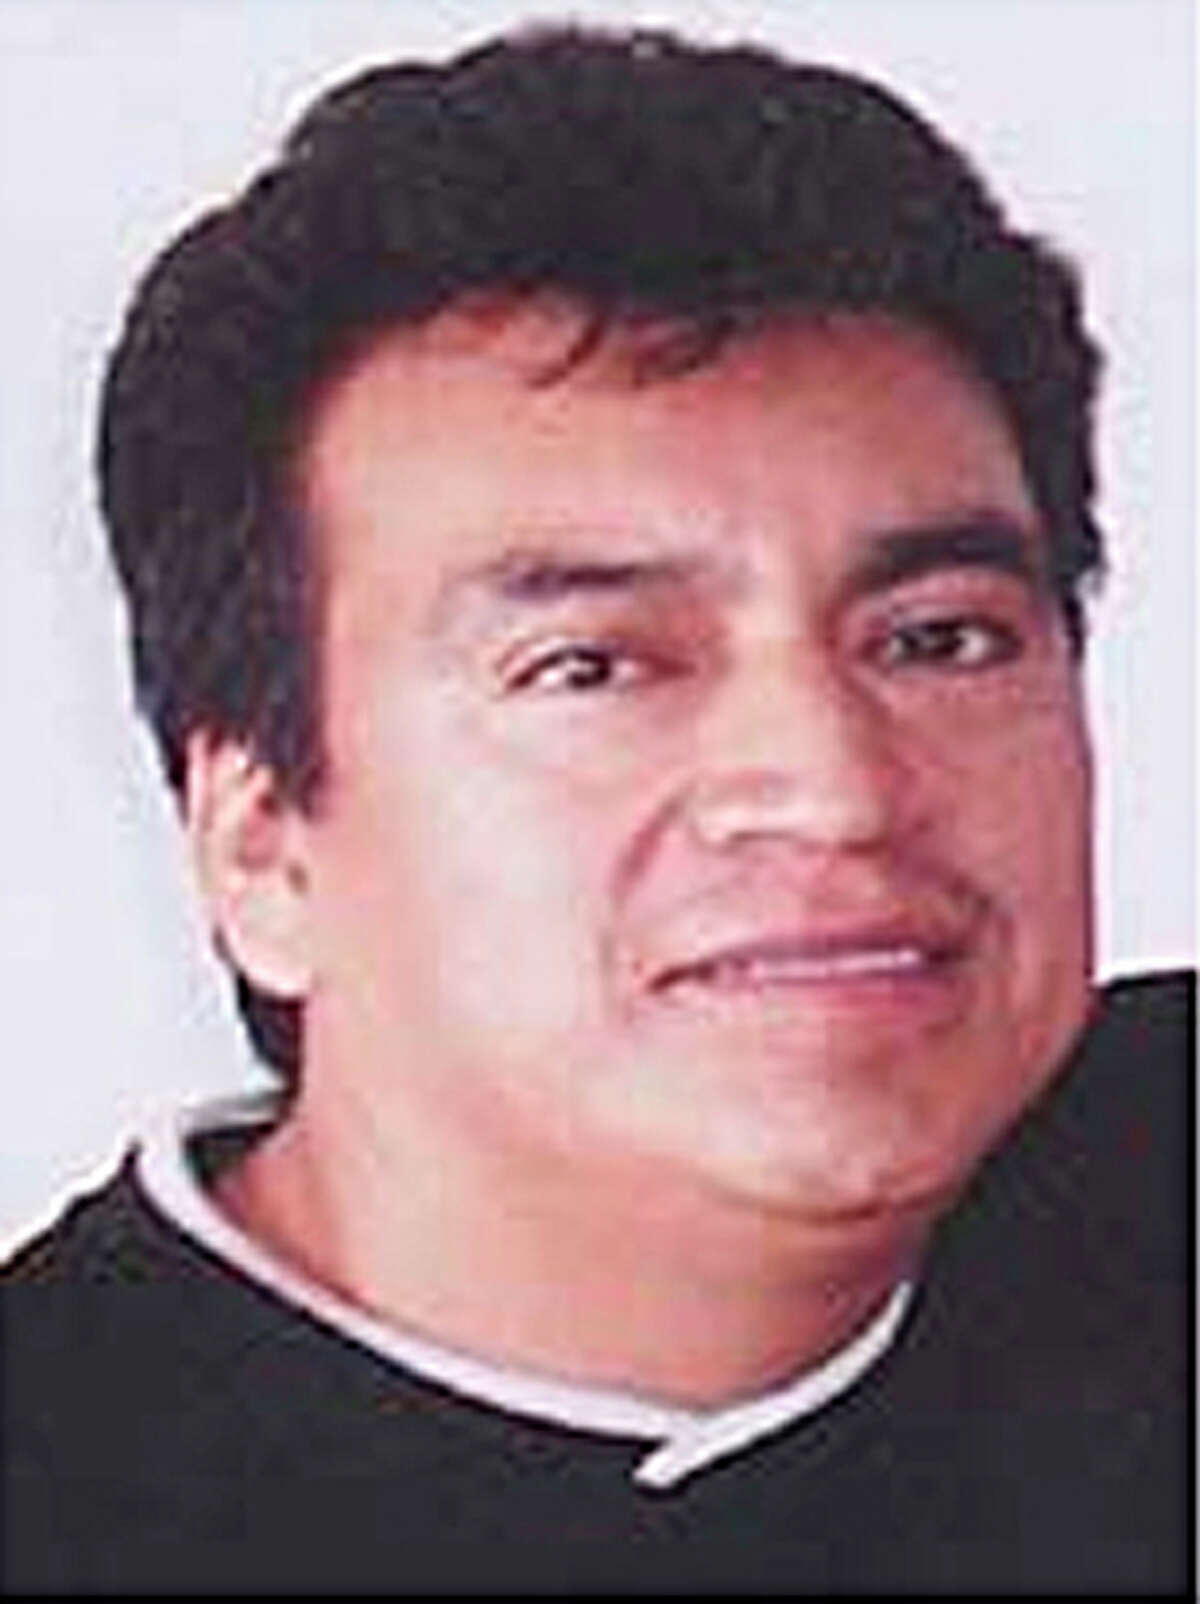 (PROVIDED PHOTO BY THE FBI) Gerardo "El Gallo" Salazar Federal police in Mexico say they arrested Gerardo Salazar who is on the FBI's most wanted list for allegedly trafficking women and minors for prostitution in Houston. Tuesday, March 2, 2010, in Houston.